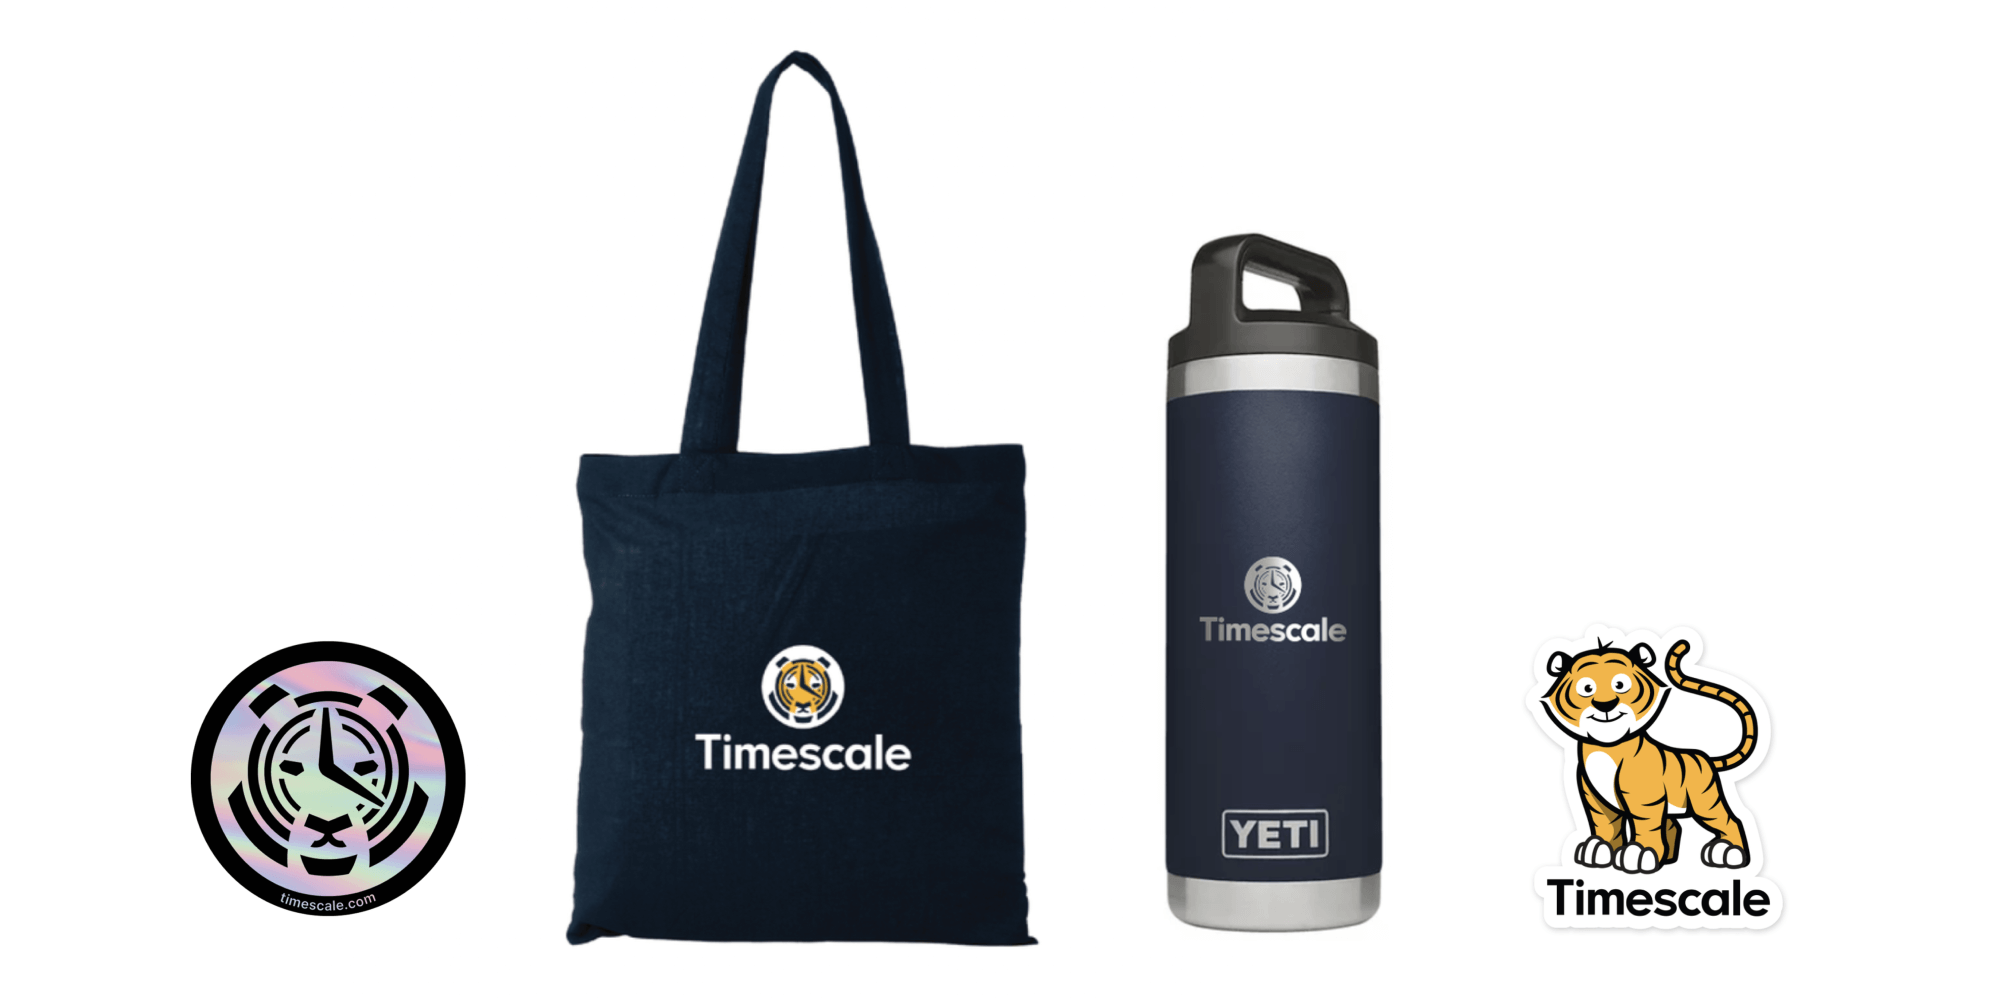 Stickers, the tote bag, and the water bottle the Timescale Team will hand out as swag at re:Invent